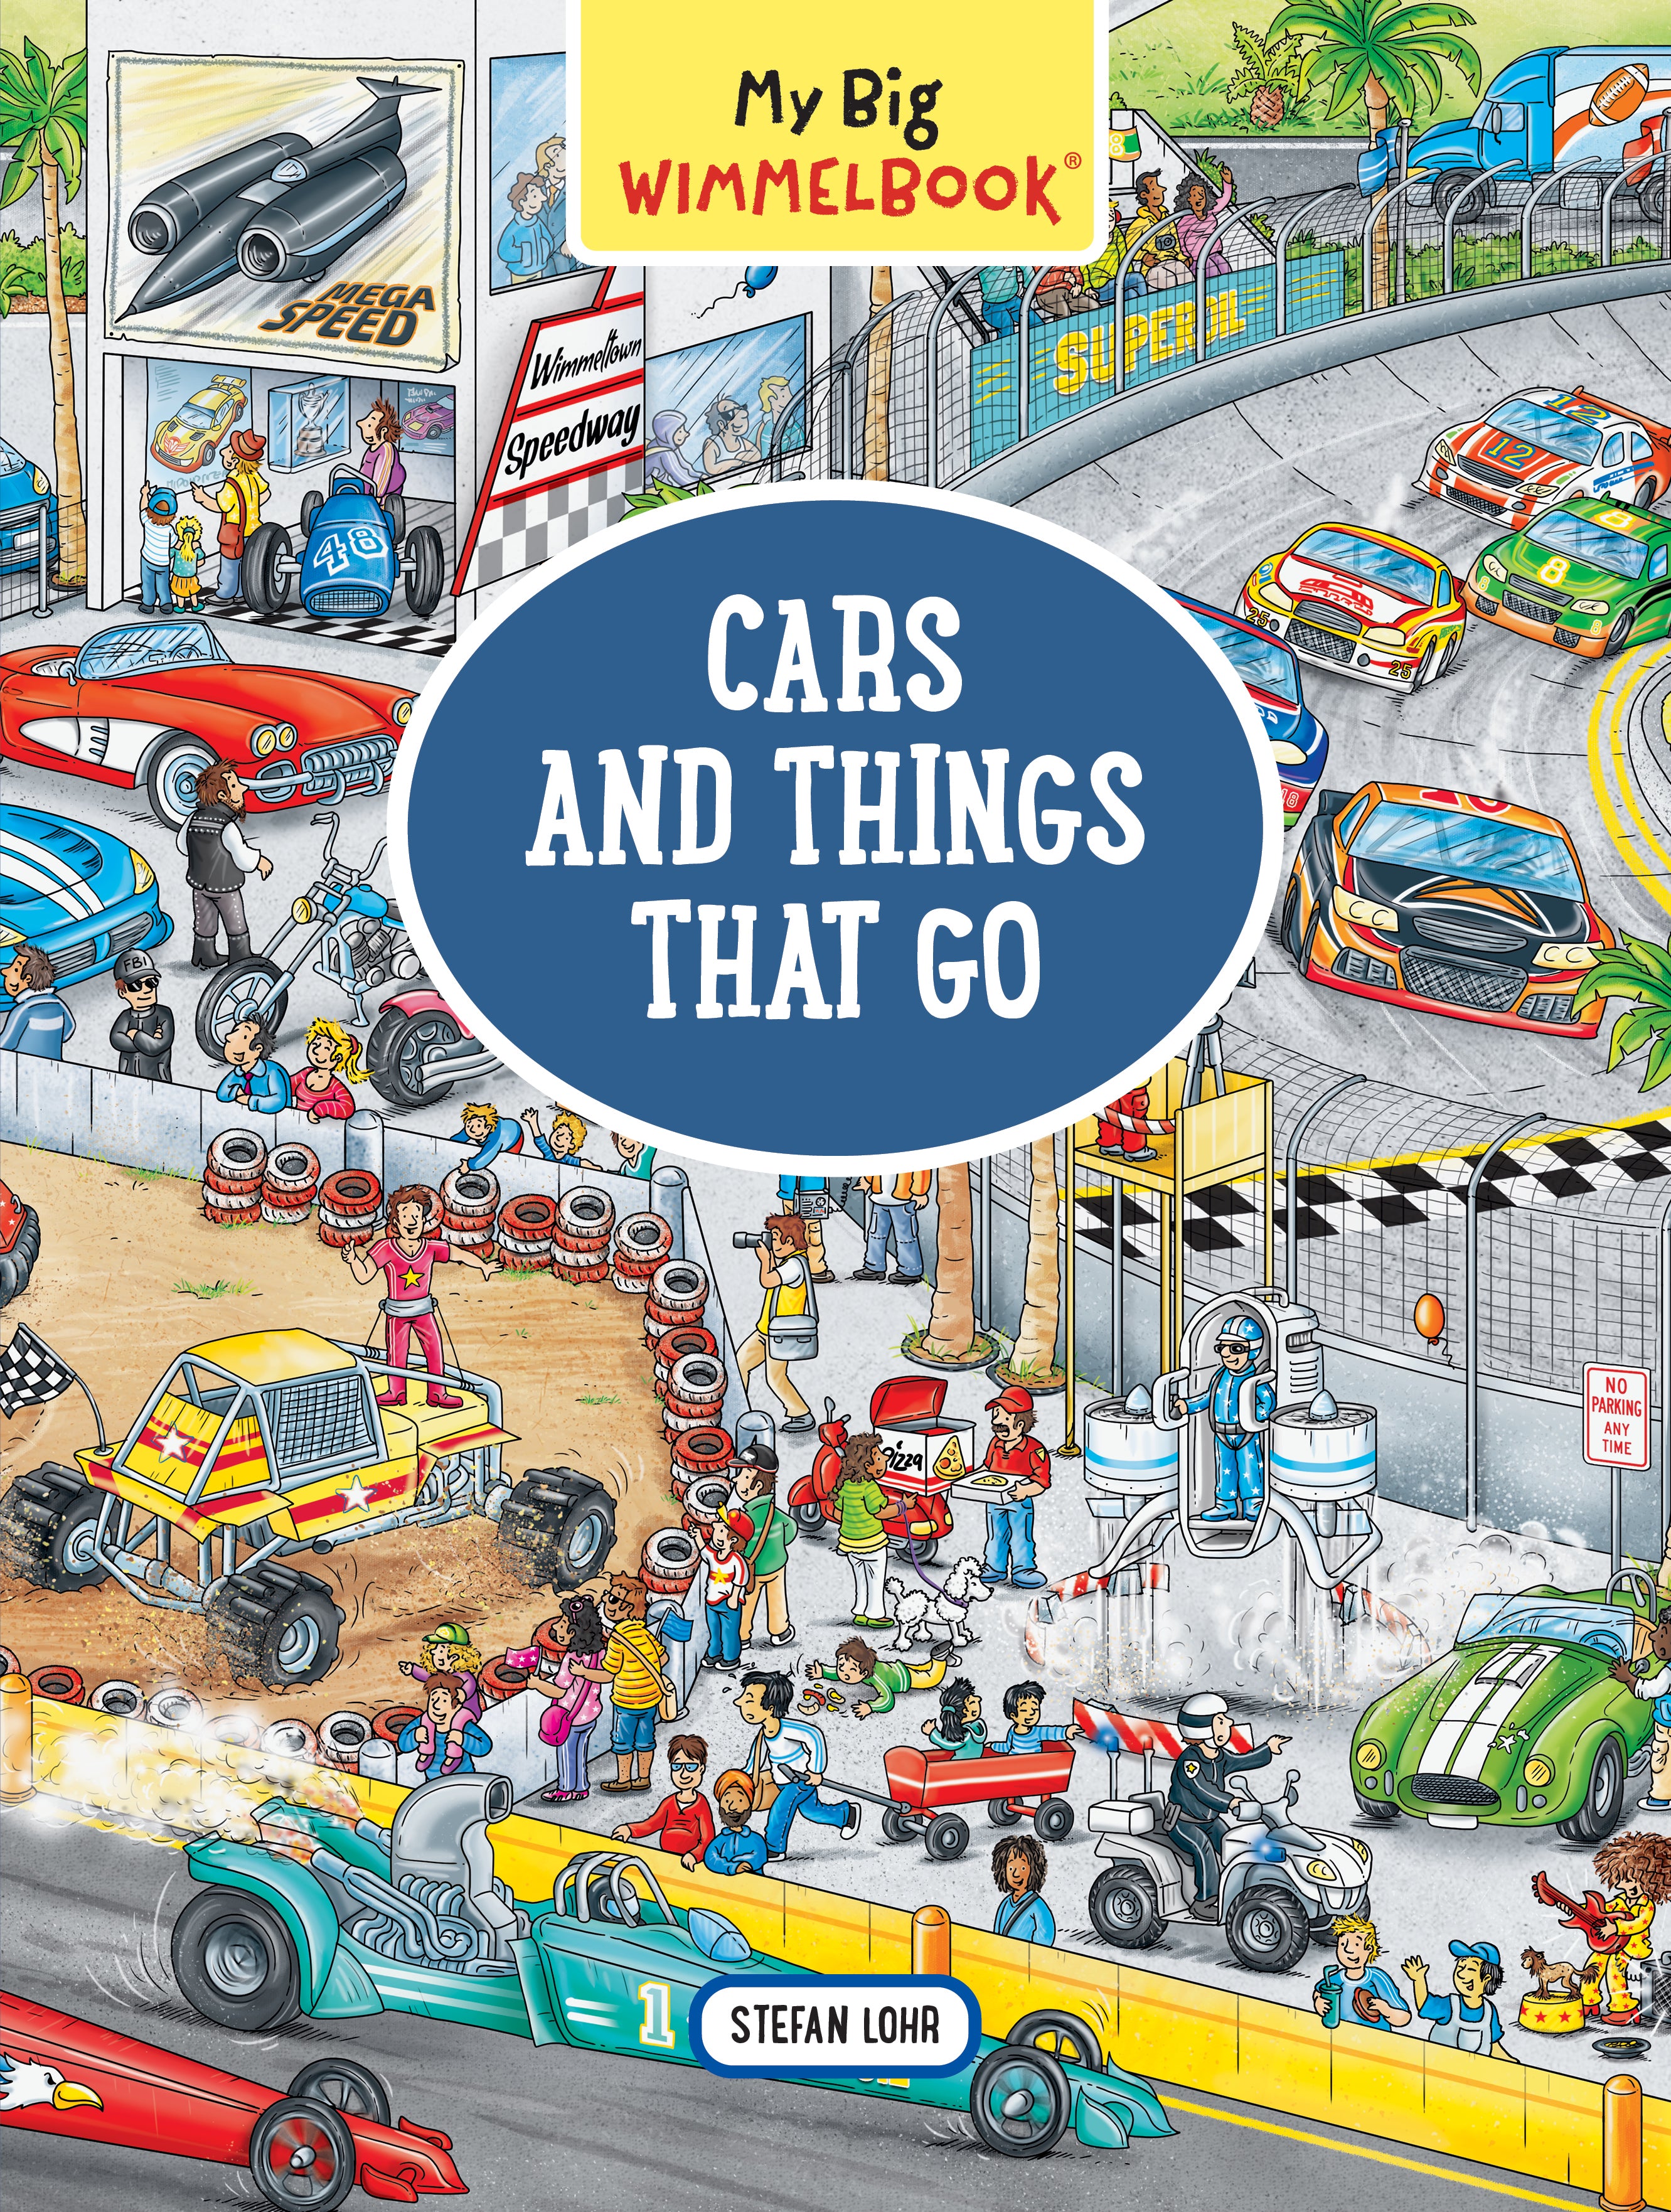 My Big Wimmelbook - Cars and Things That Go    